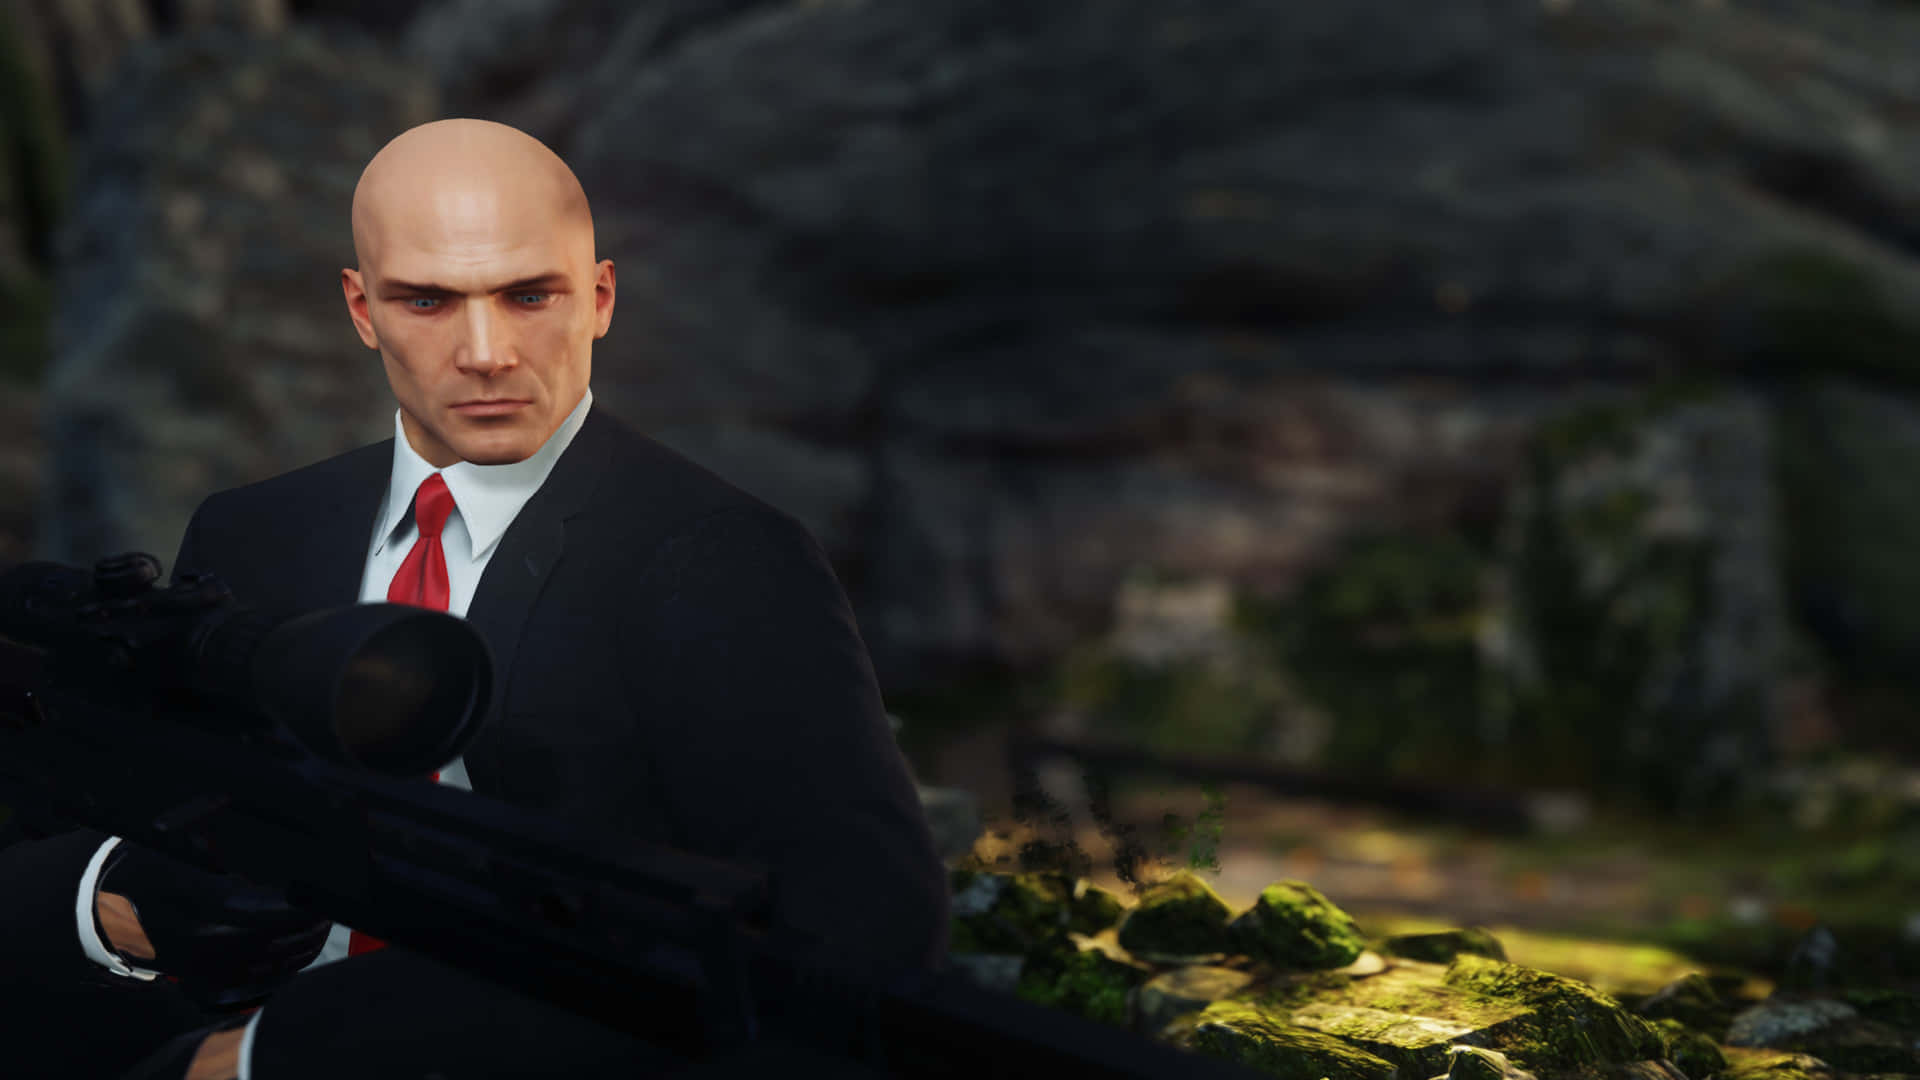 A Man In A Suit And Tie Holding A Rifle Wallpaper